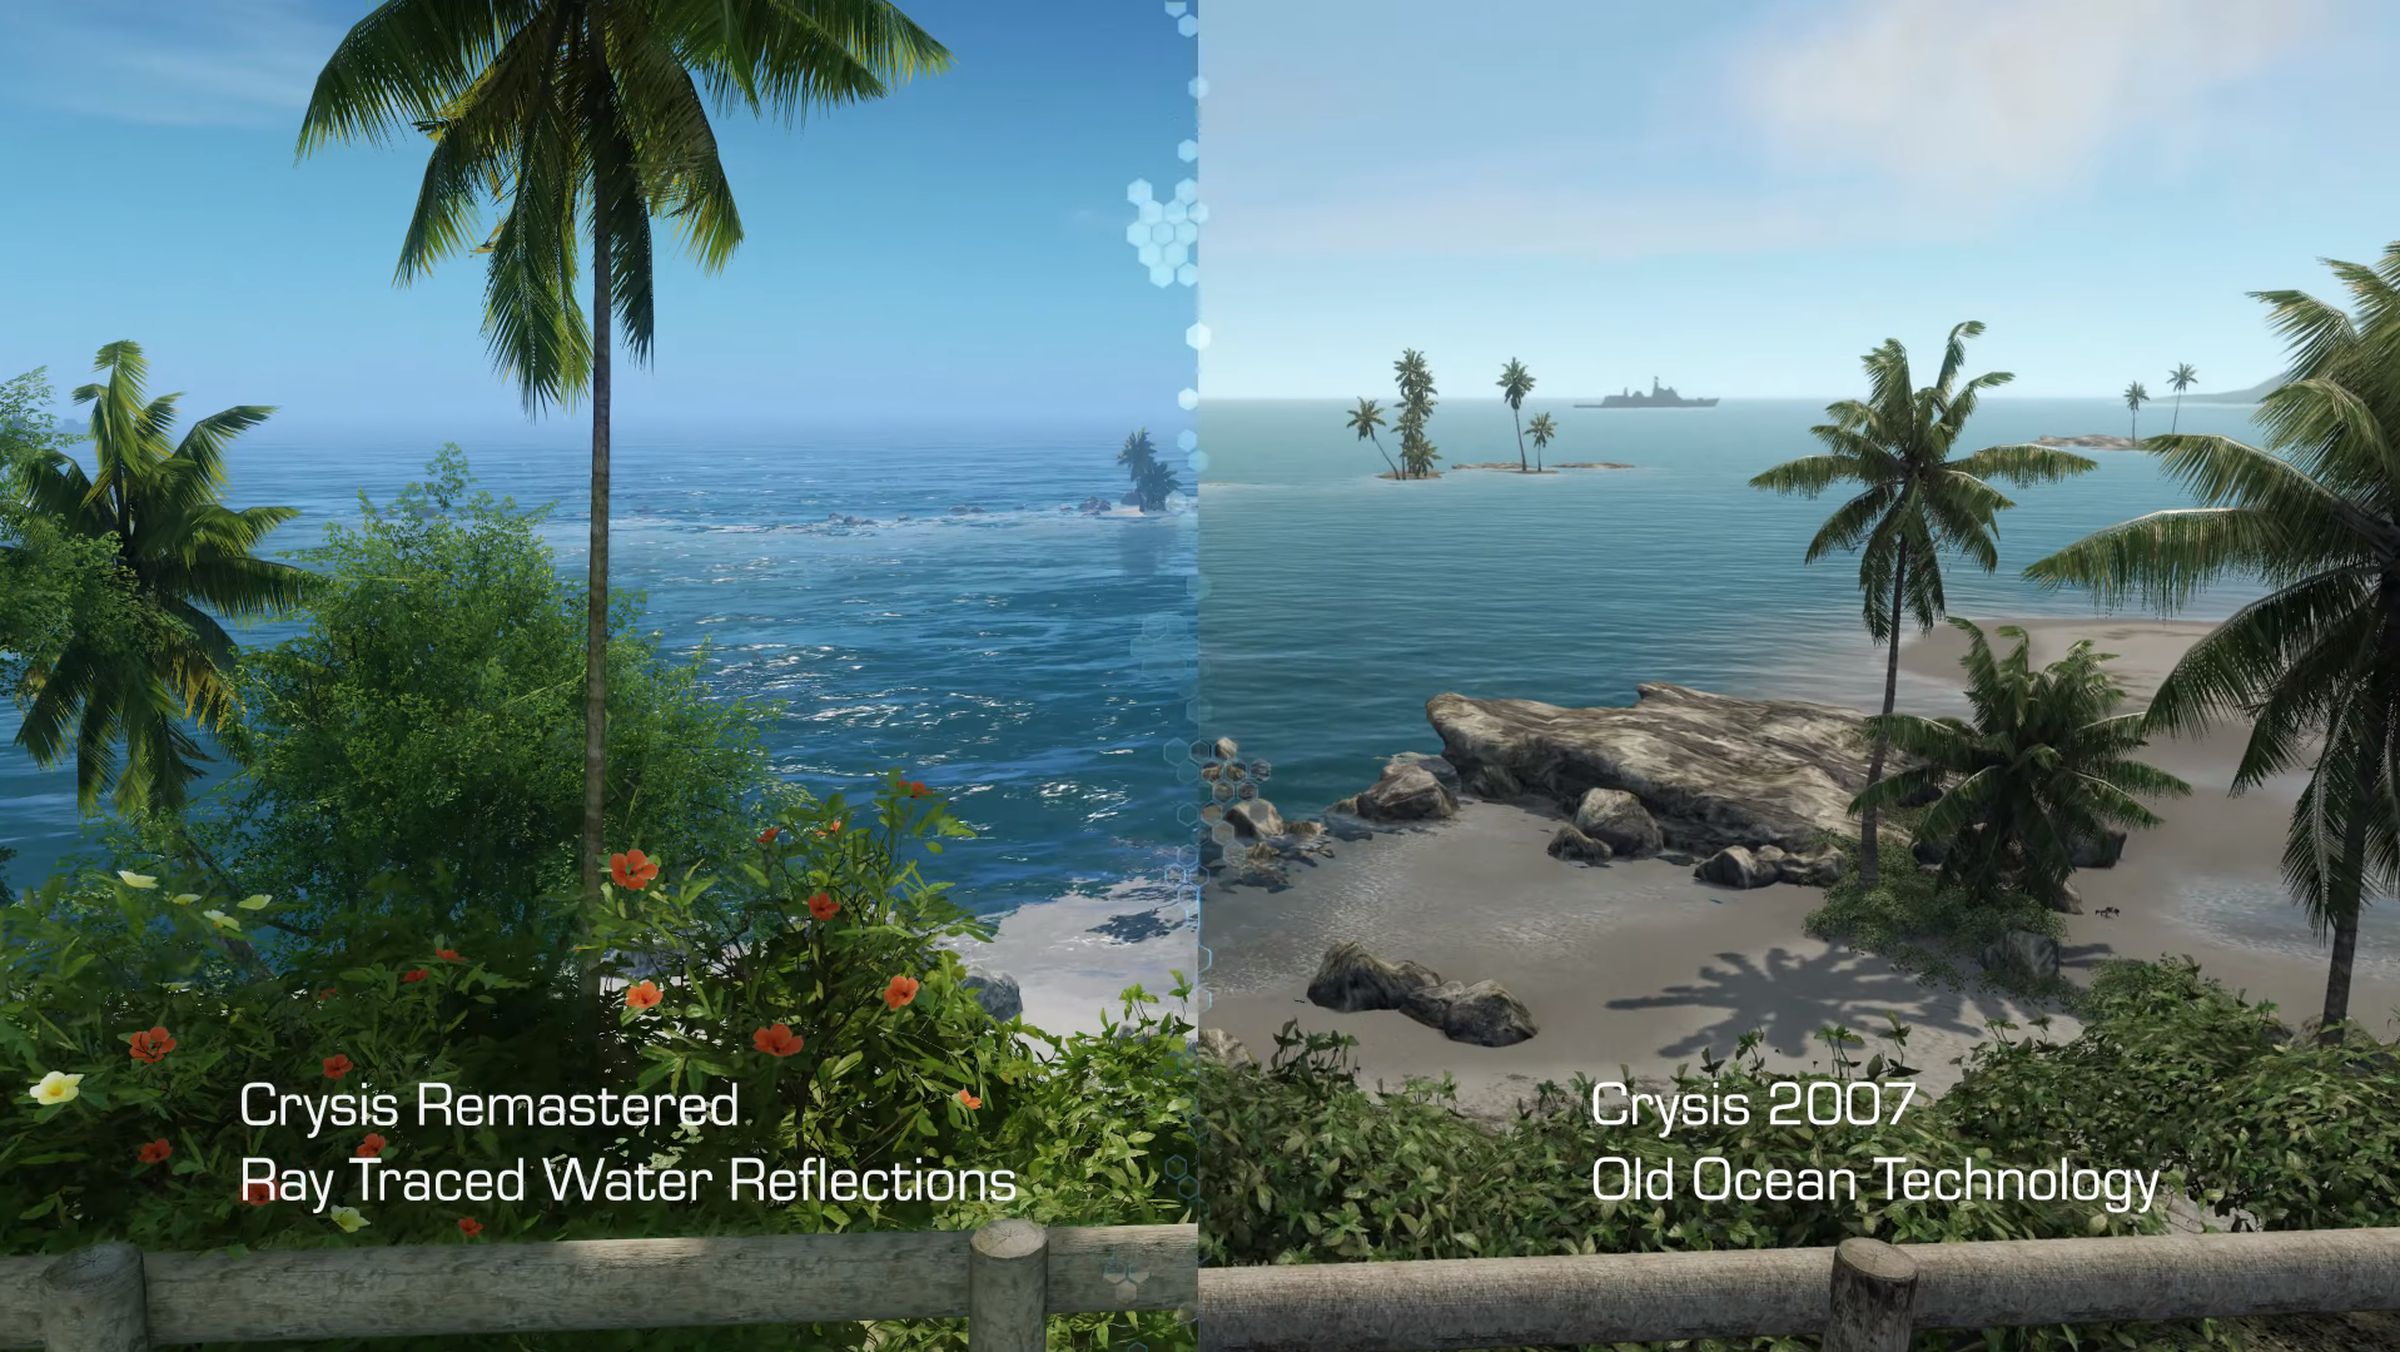 More color and detail such as flowers were added to Crysis Remastered.